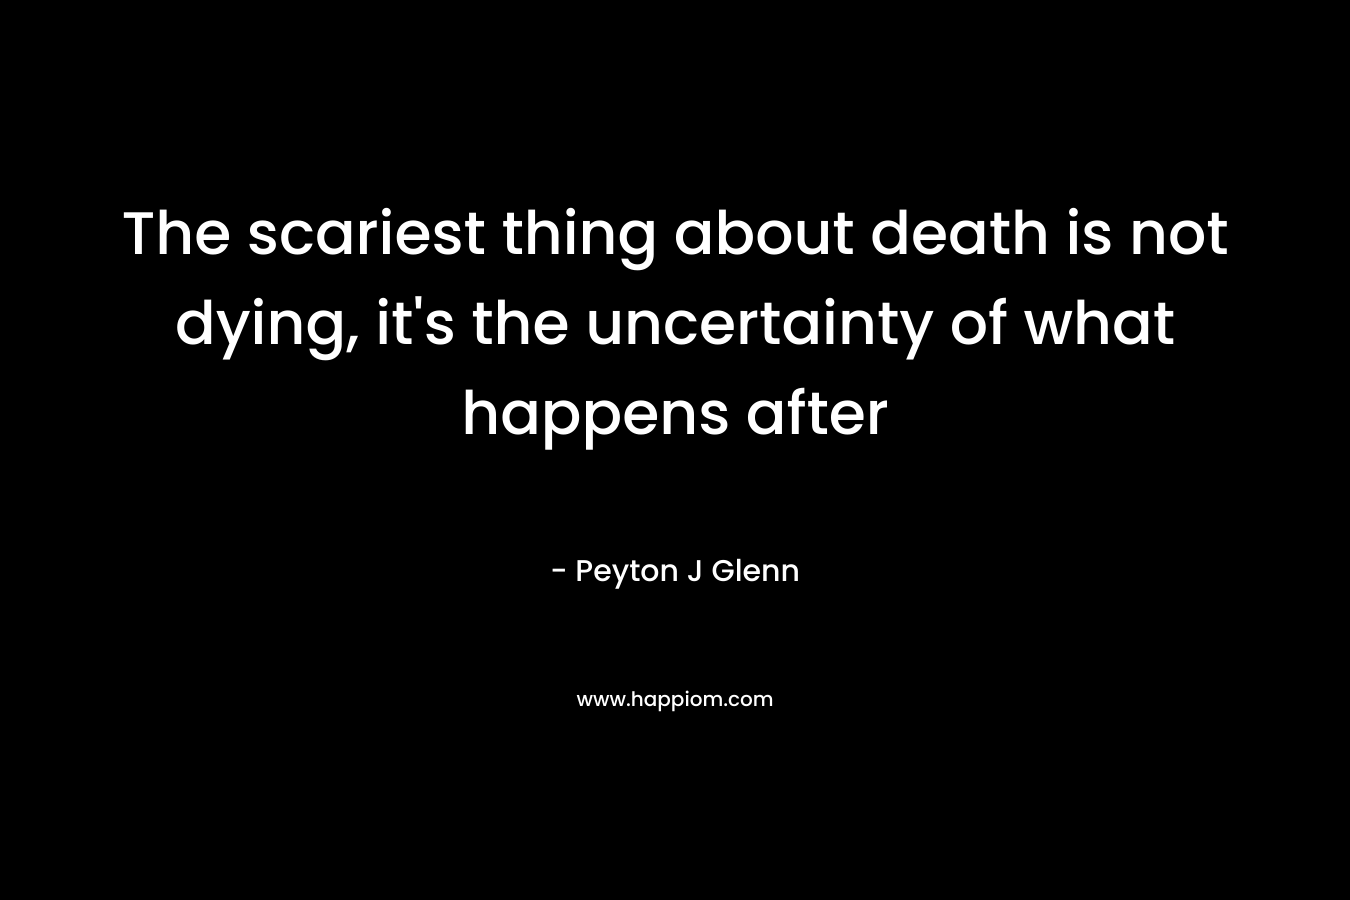 The scariest thing about death is not dying, it’s the uncertainty of what happens after – Peyton J Glenn